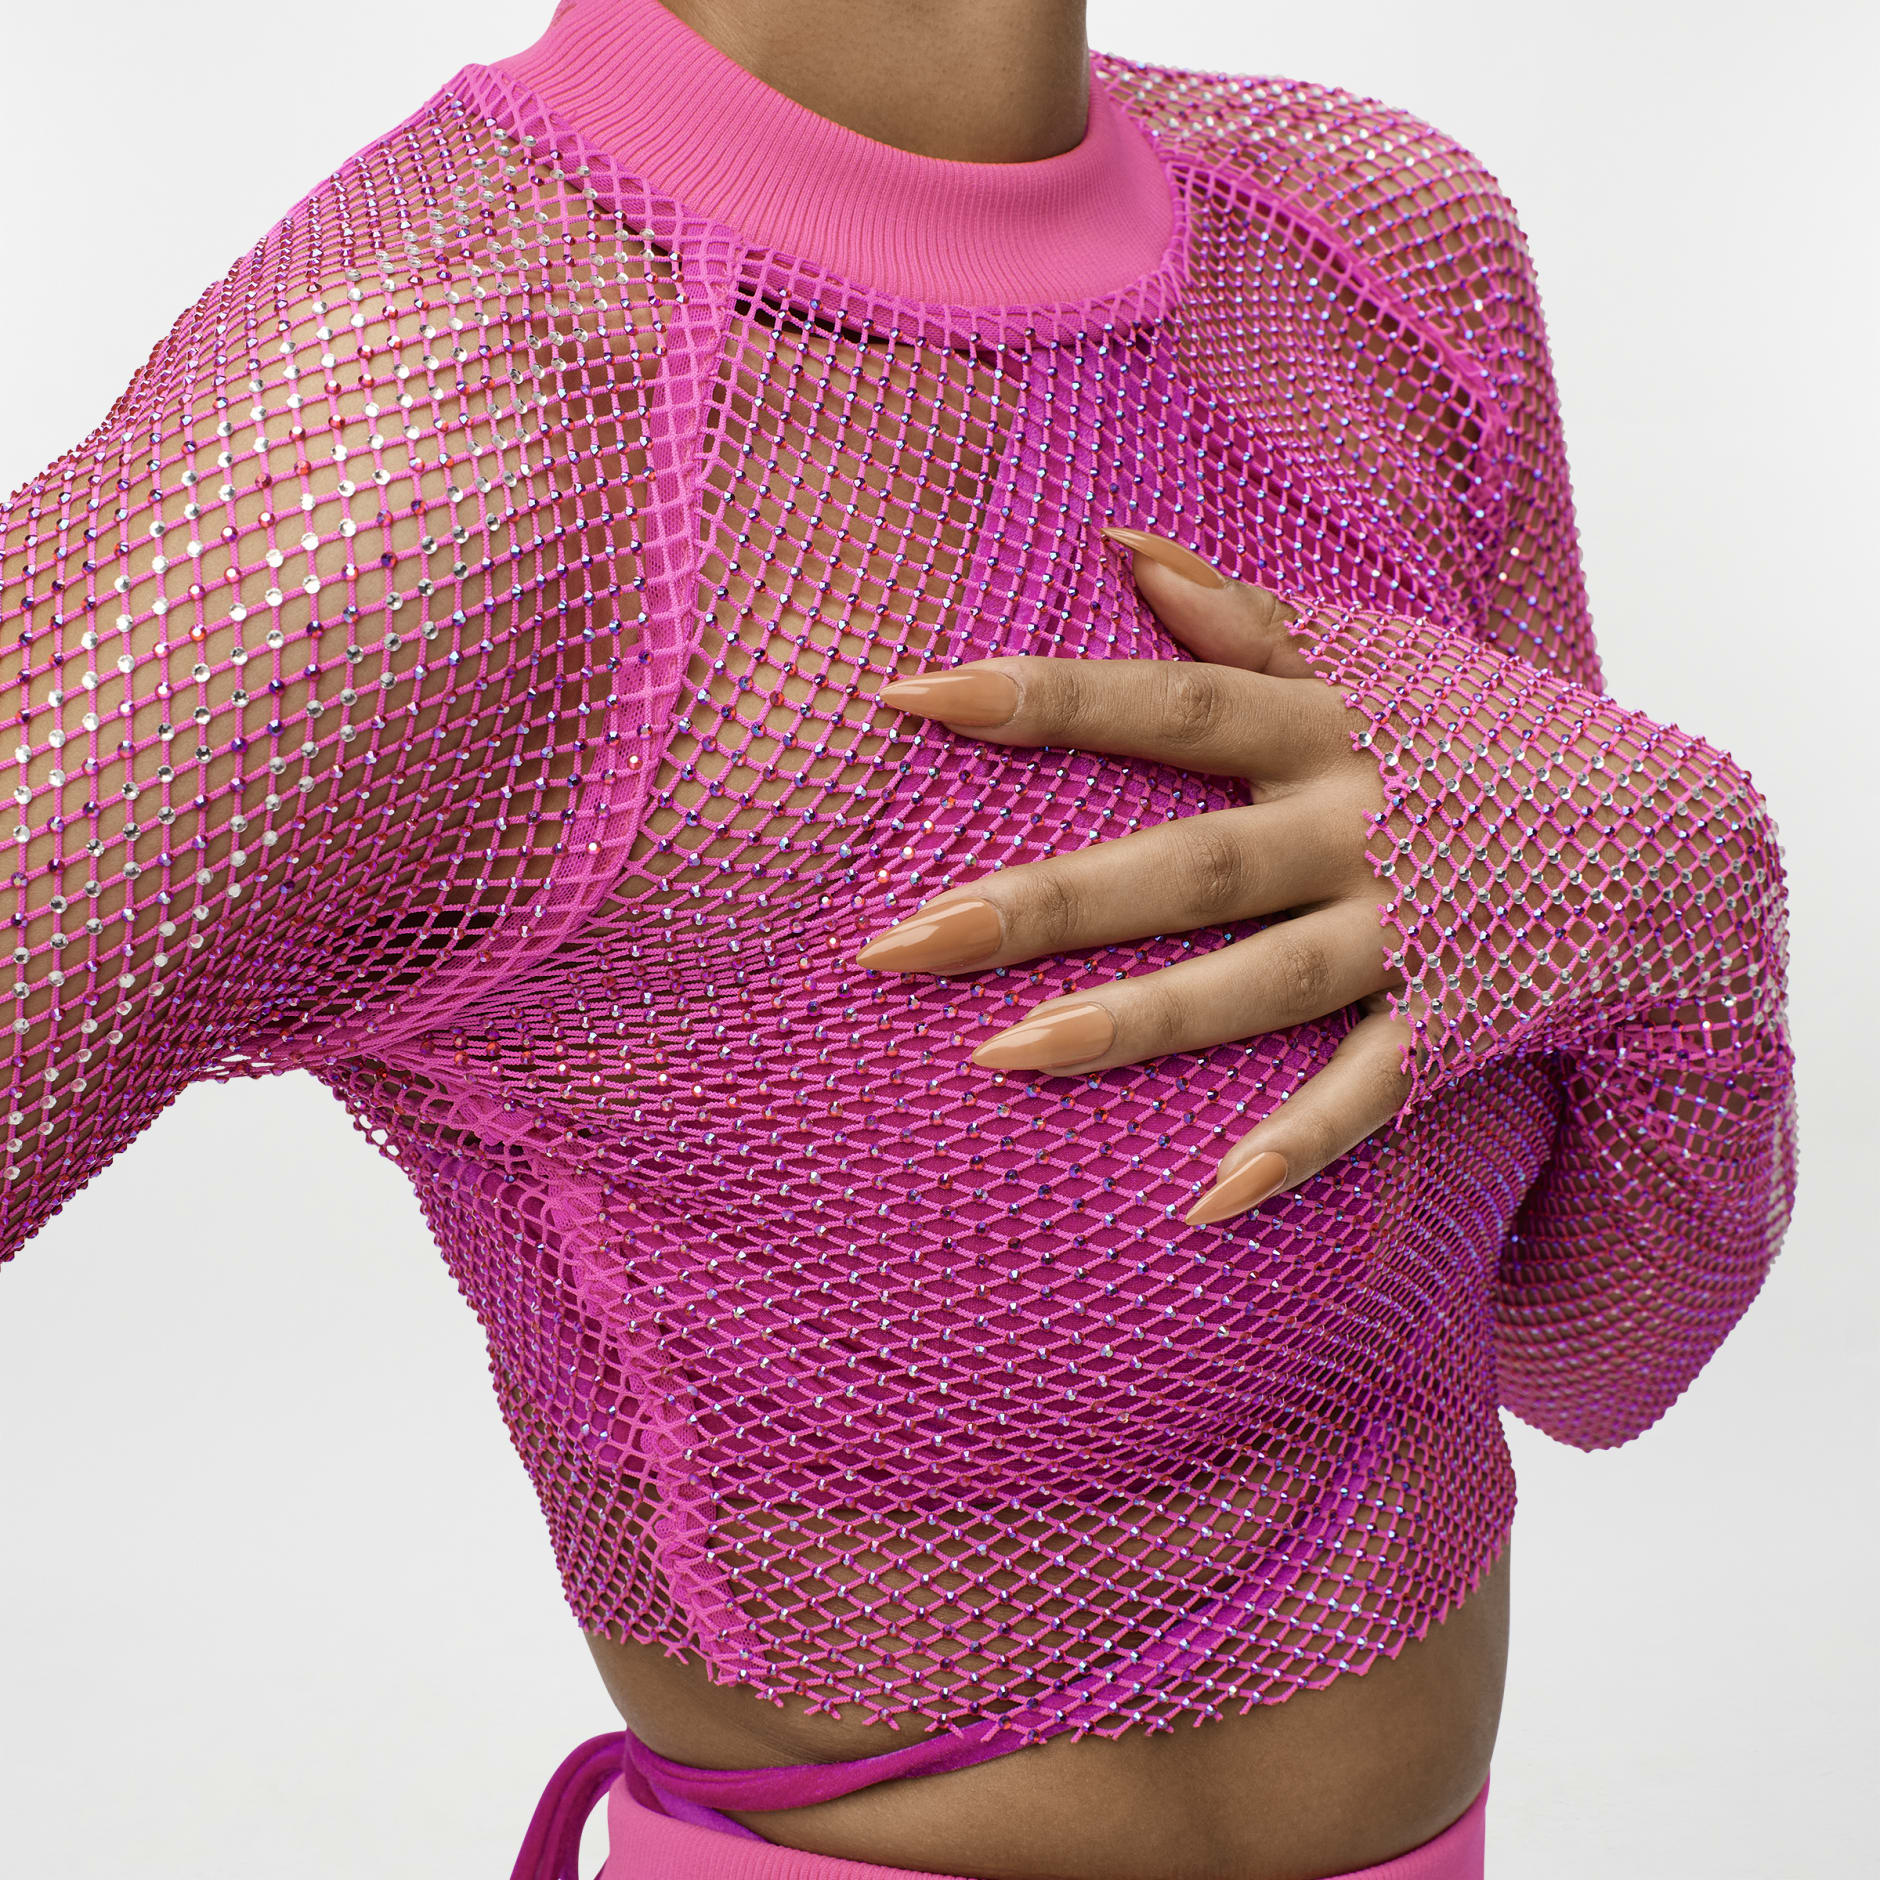 Women's Clothing - IVY PARK Crystal Mesh Cover-Up Top - Pink